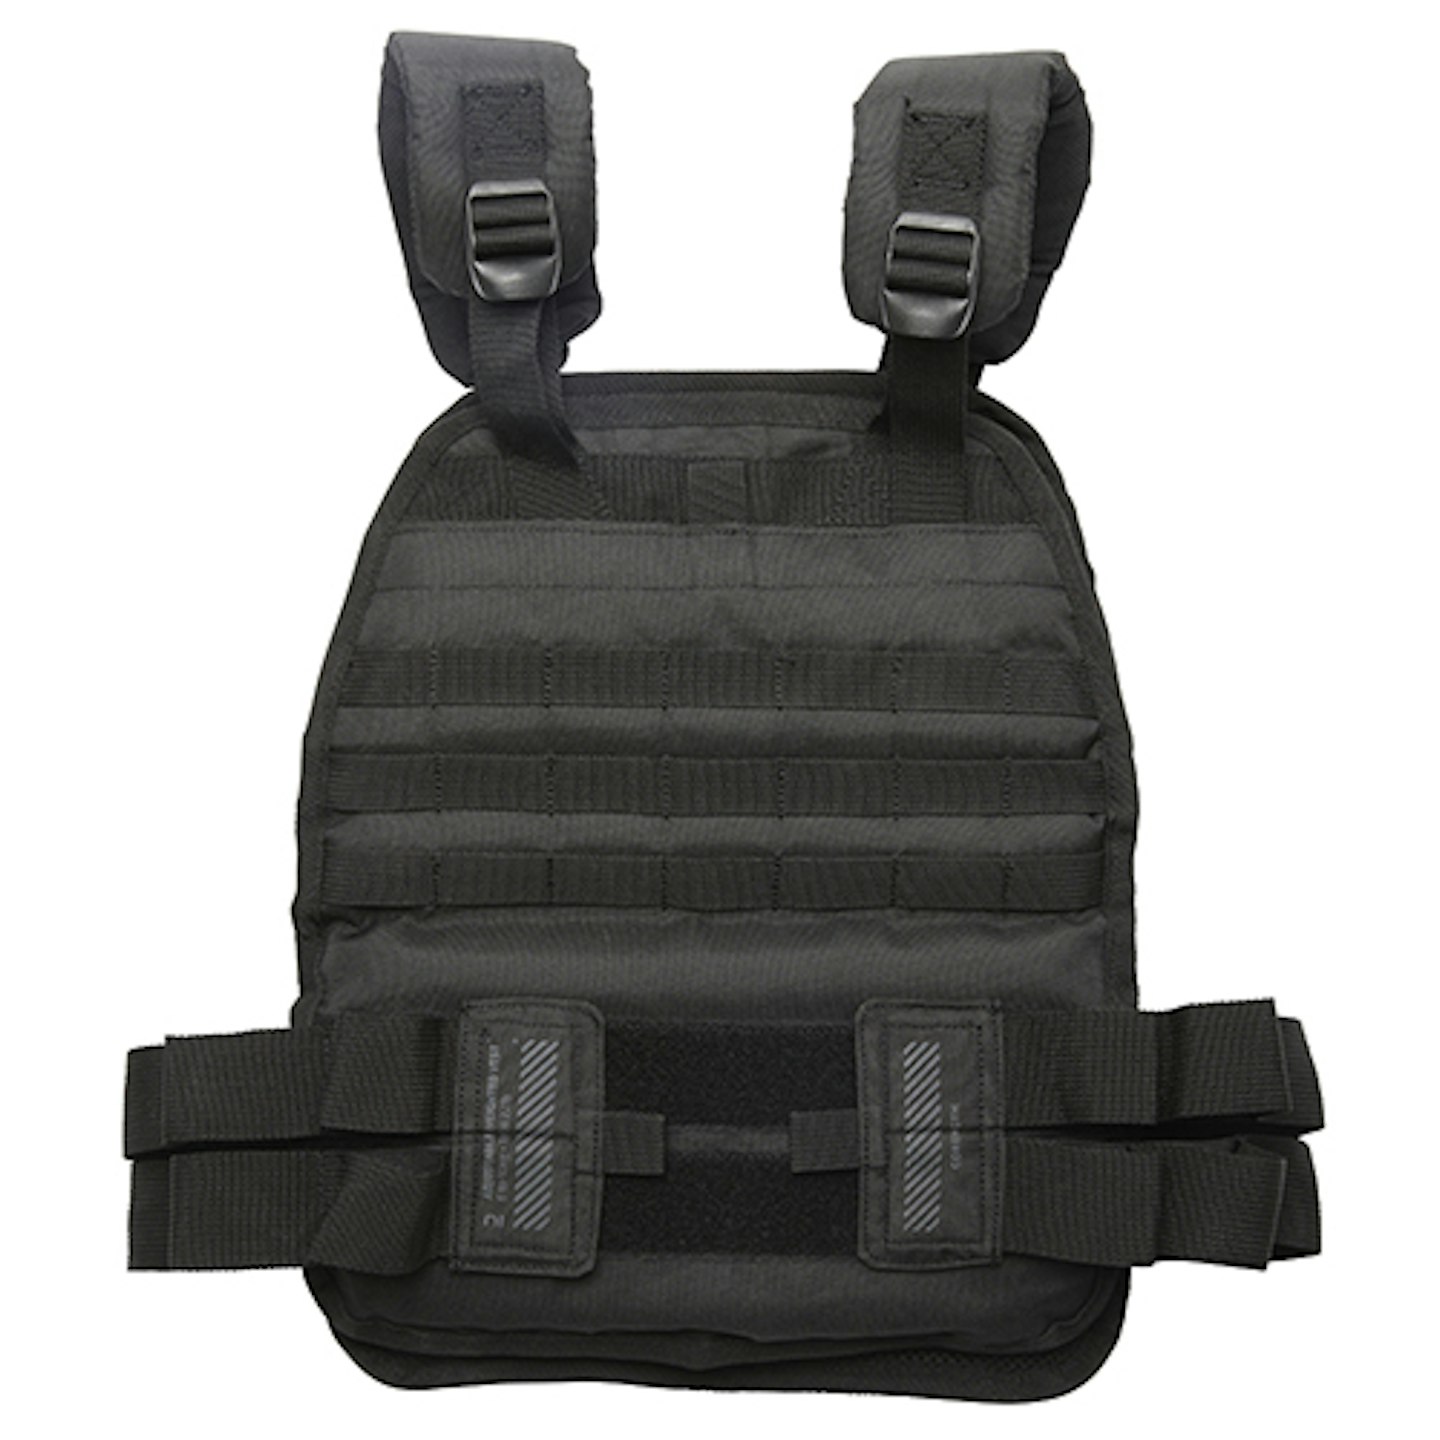 Corength weighted vest